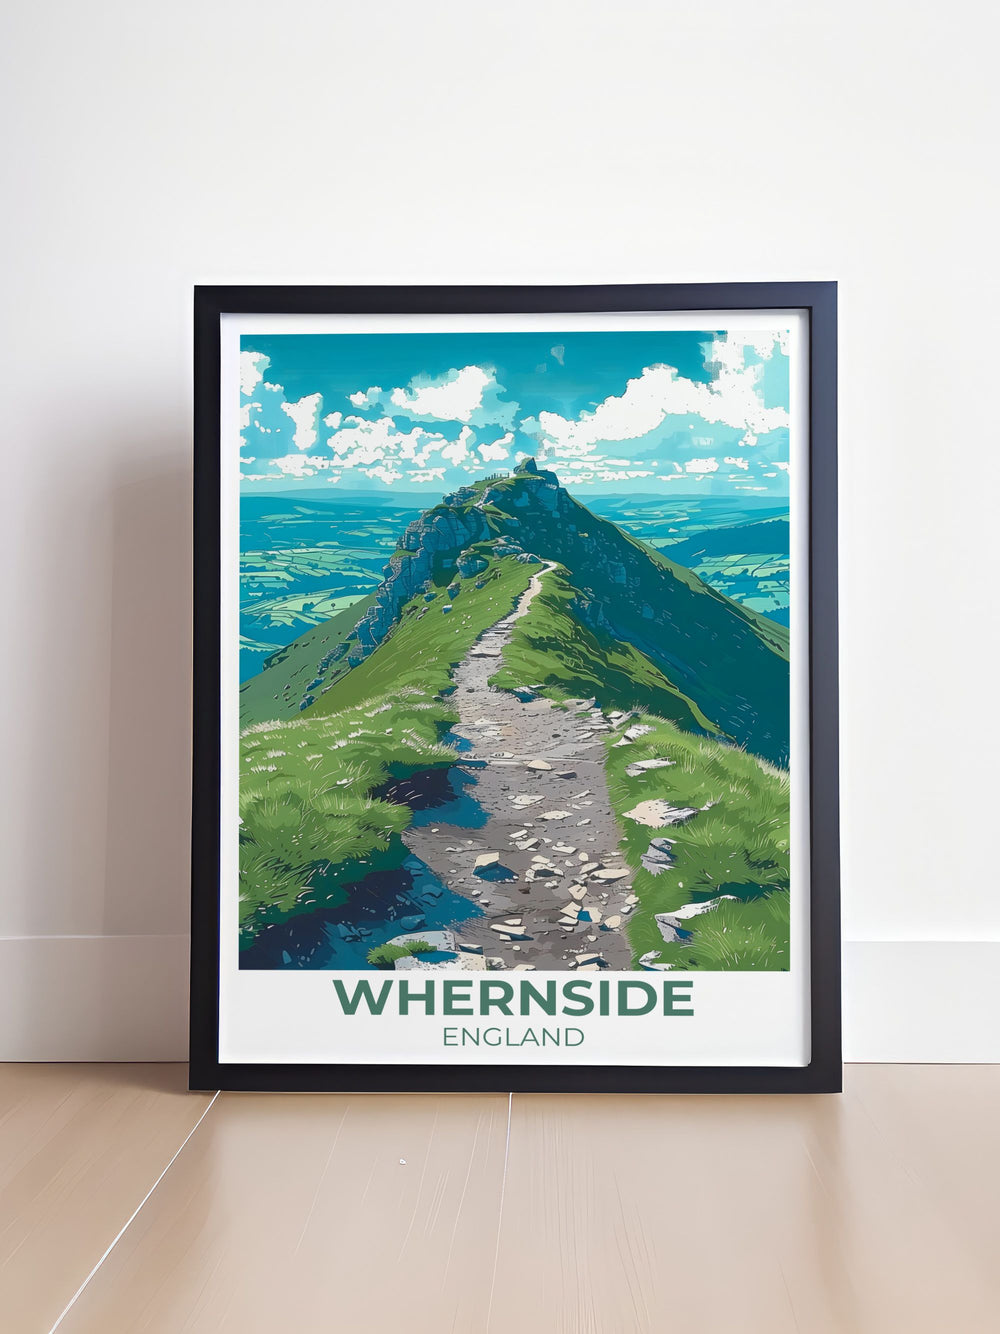 Beautiful home decor print capturing the breathtaking views from the summit of Whernside. This artwork brings the natural charm and rugged beauty of Yorkshires highest peak into any room.